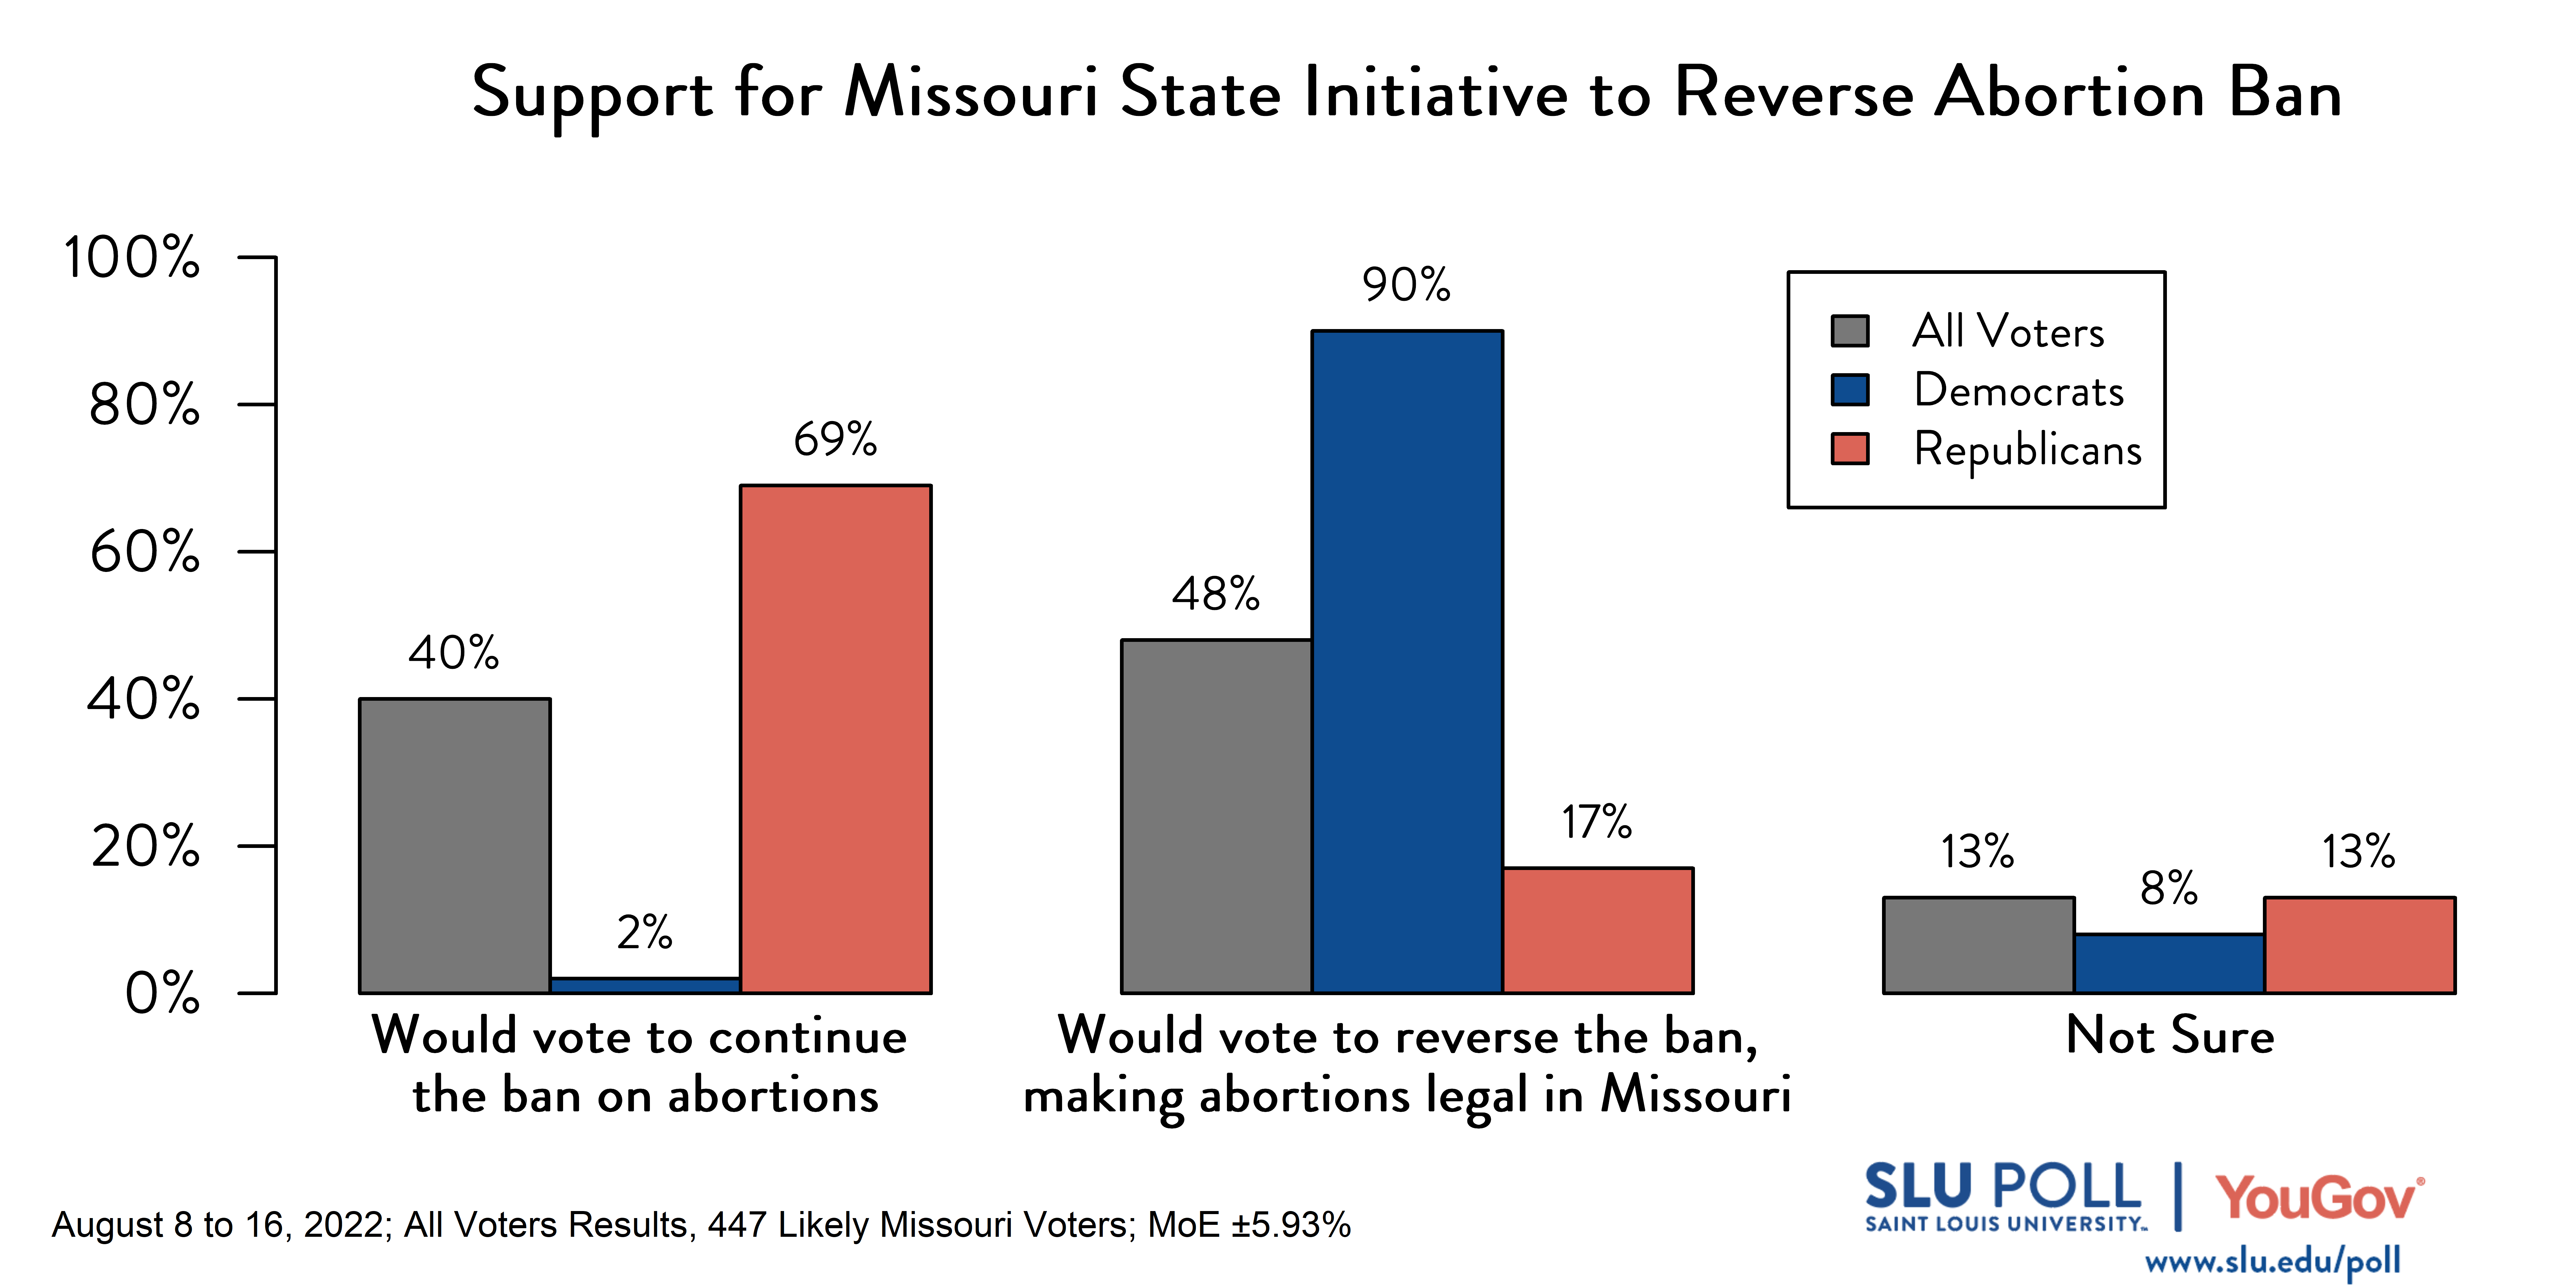 This bar graph shows likely voters' response to, "If an initiative were put on a Missouri ballot to reverse the new ban on abortions in Missouri, making it legal for women to receive an abortion in Missouri, how would you vote?" 40% of all voters, 2% of Democrats, and 69% of Republicans would vote to continue the ban on abortion. 48% of all voters, 90% of Democrats, and 17% of Republicans would vote to reverse the ban, making abortions legal in Missouri. 13% of all voters, 8% of Democrats, and 13% of Republicans indicated they were not sure. 